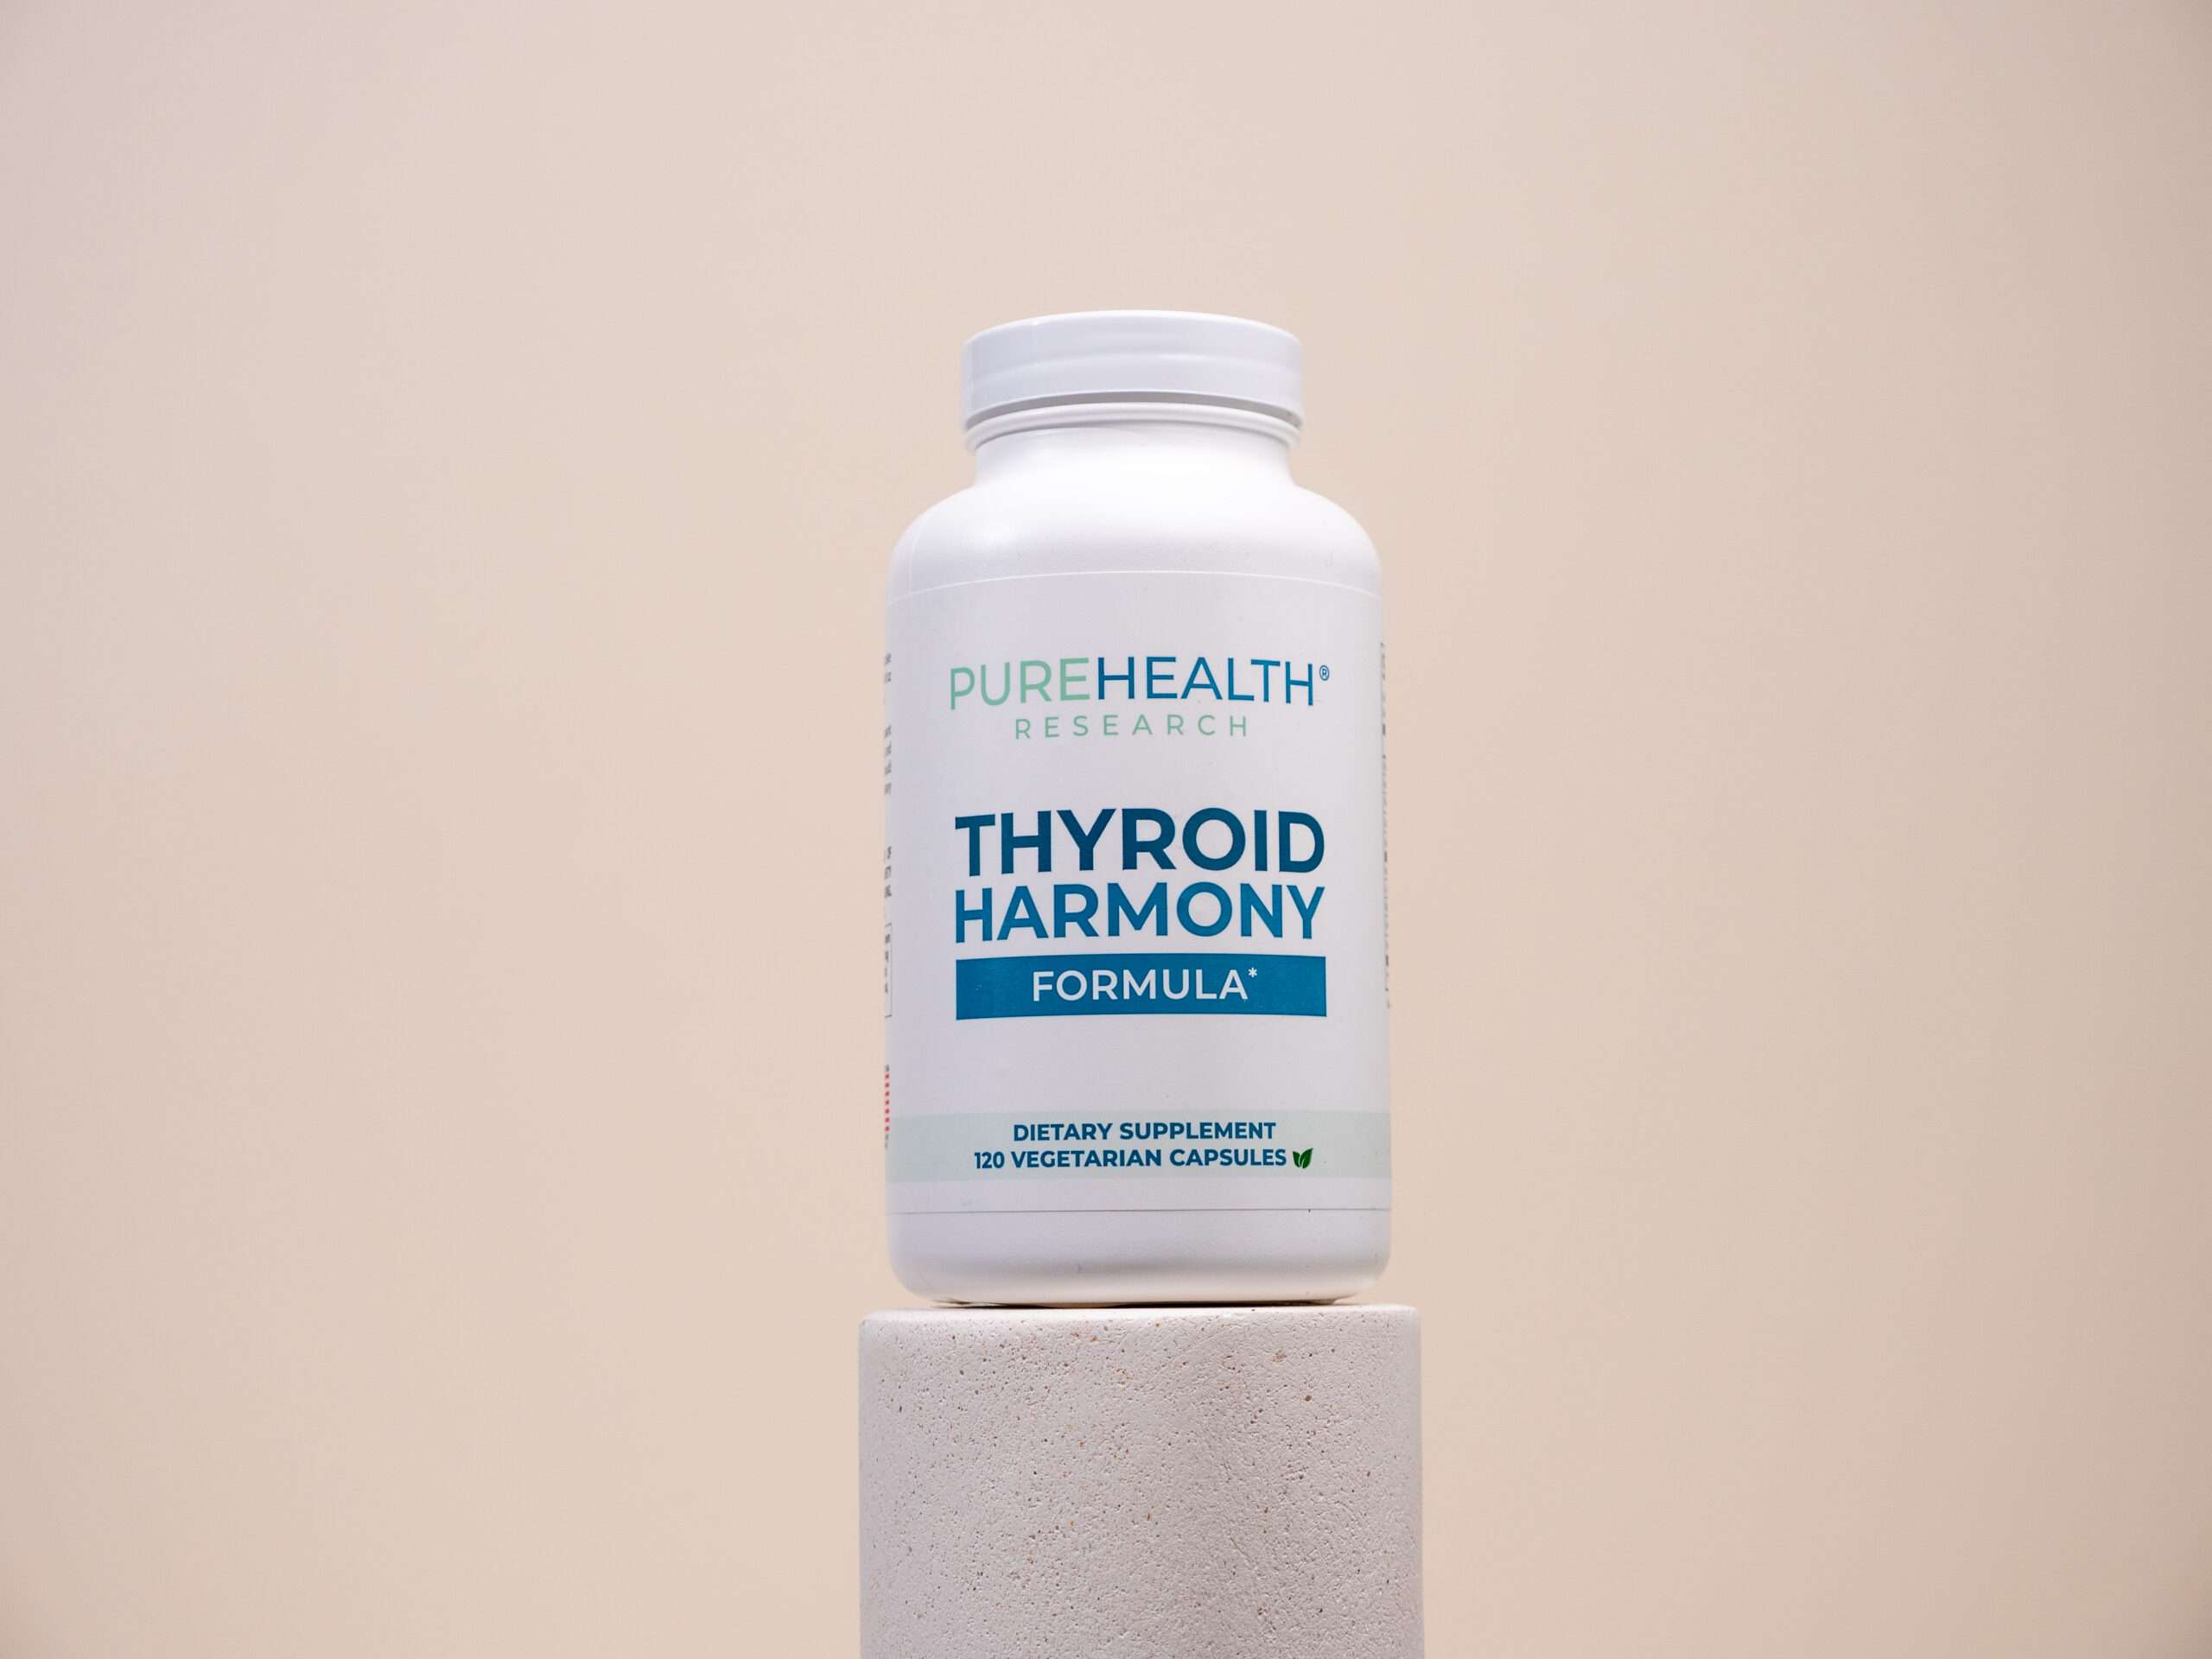 Thyroid Harmony supplement by PureHealth Research